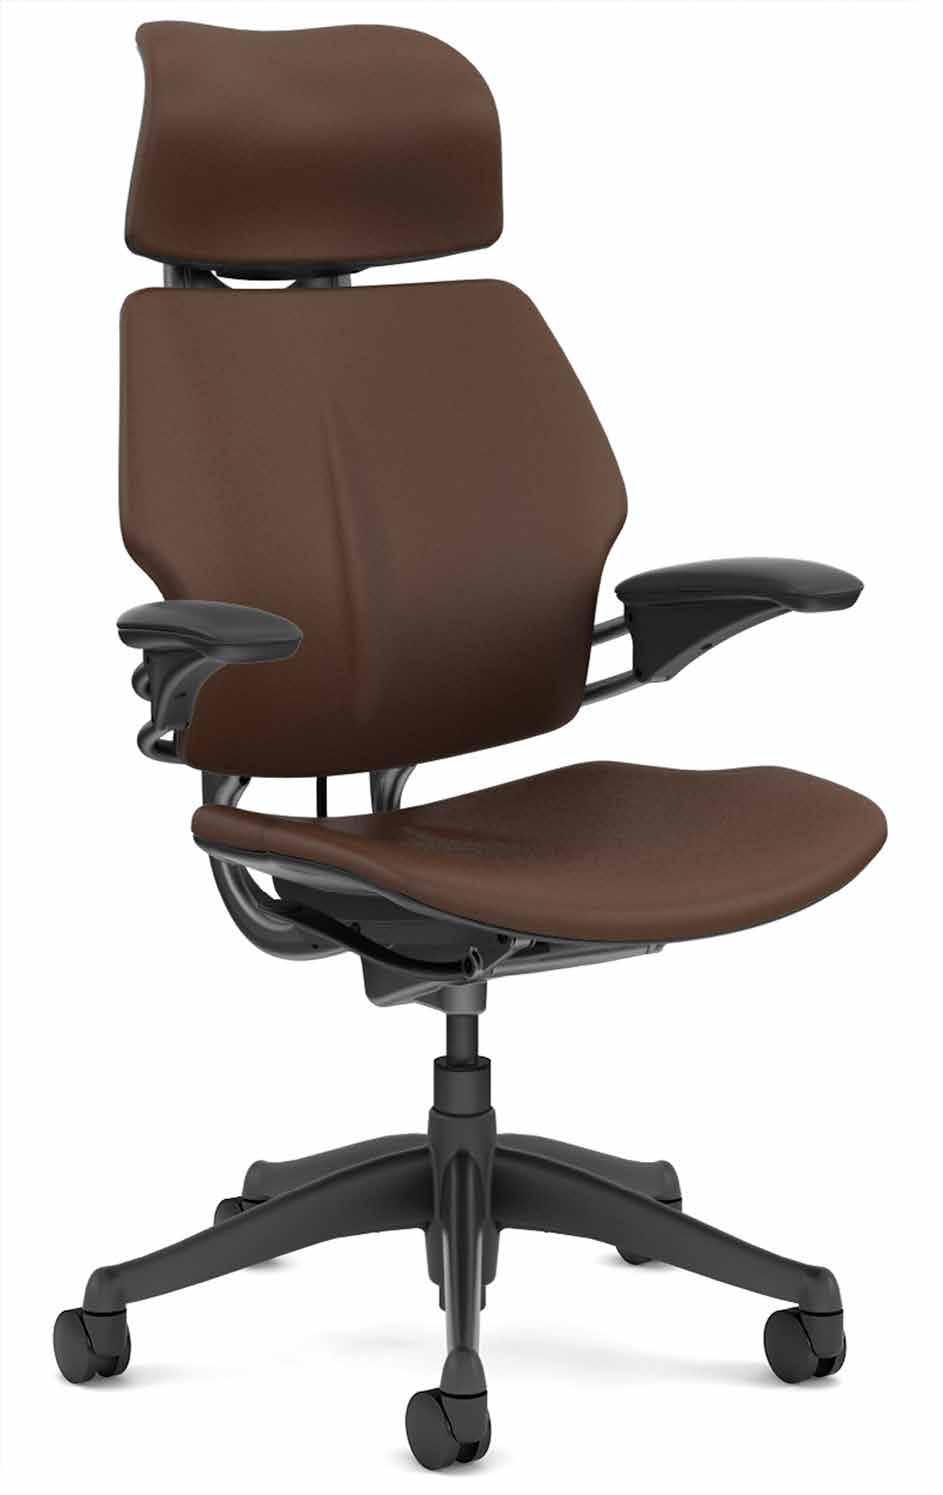 Seating GSA Contract #GS-29F-0001N Task Chair One million users can t be wrong.